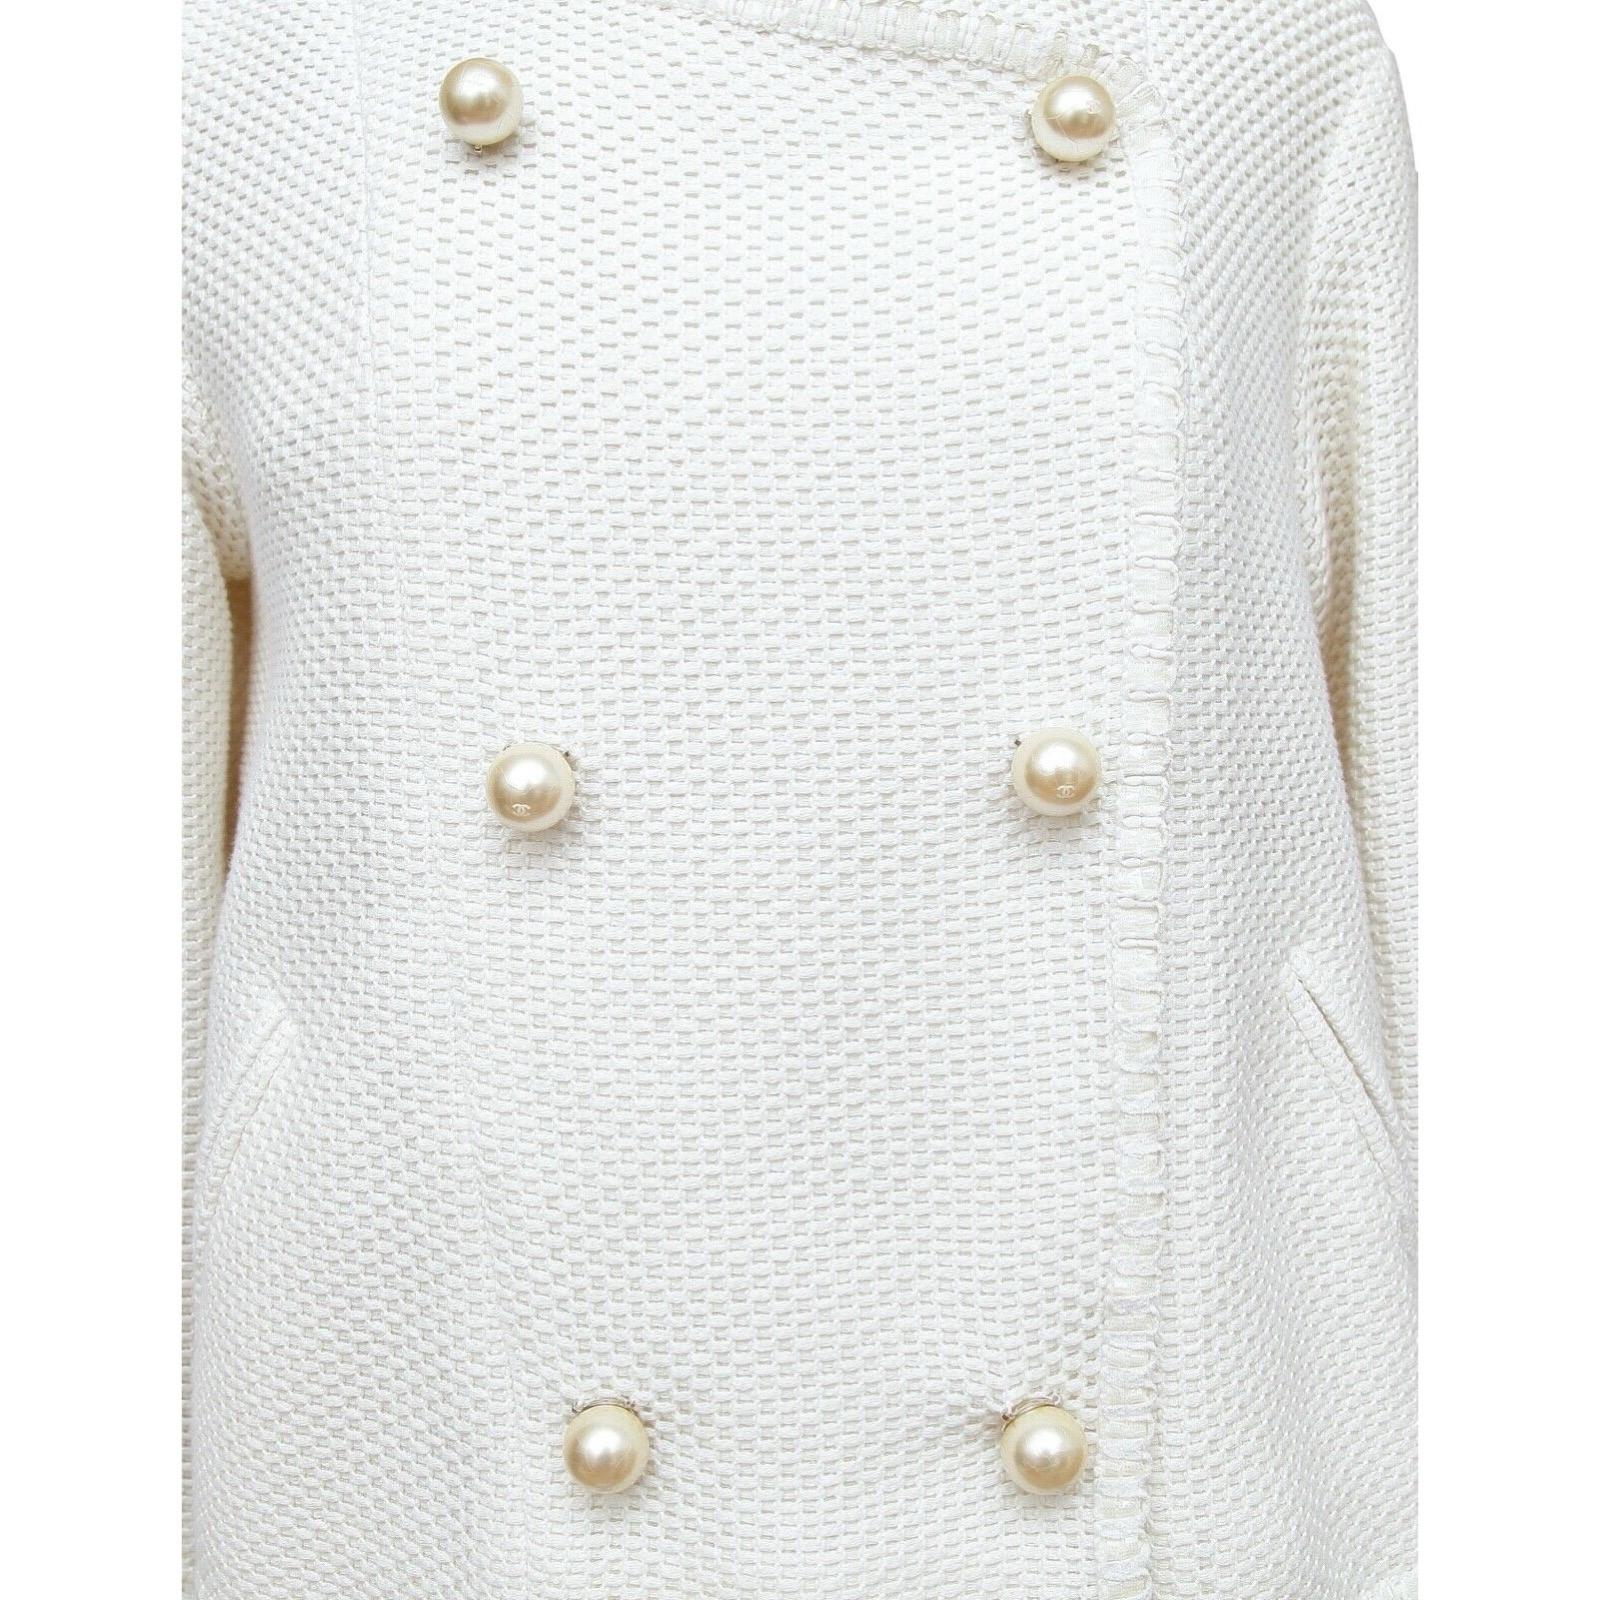 CHANEL Tweed Jacket Coat White Pearl 3/4 Sleeve Double Breasted 2013 13S Sz 34 For Sale 1